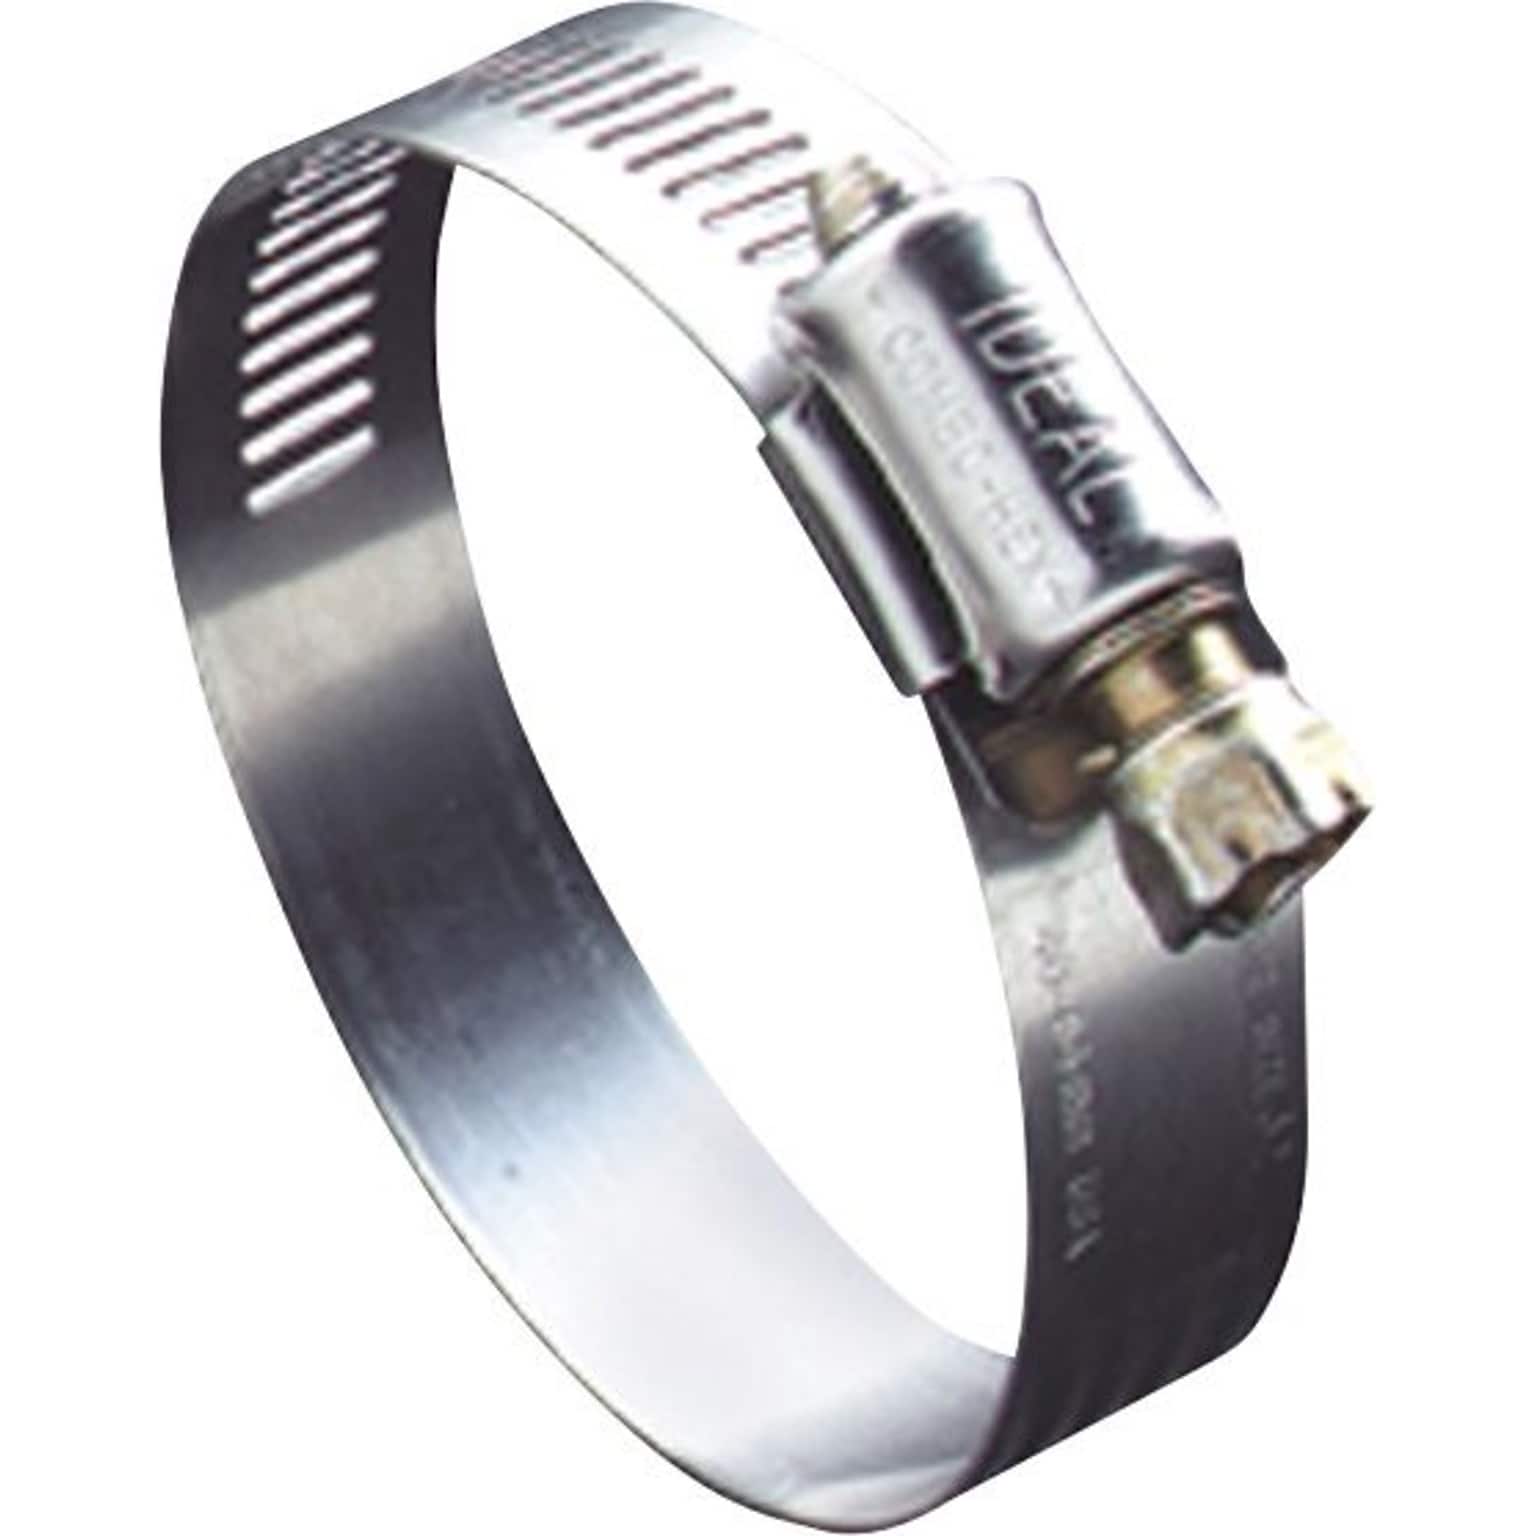 Hy-Gear® 201/301 Stainless Steel 50 Small Diameter Hose Clamp, 7/16 - 1 in Capacity